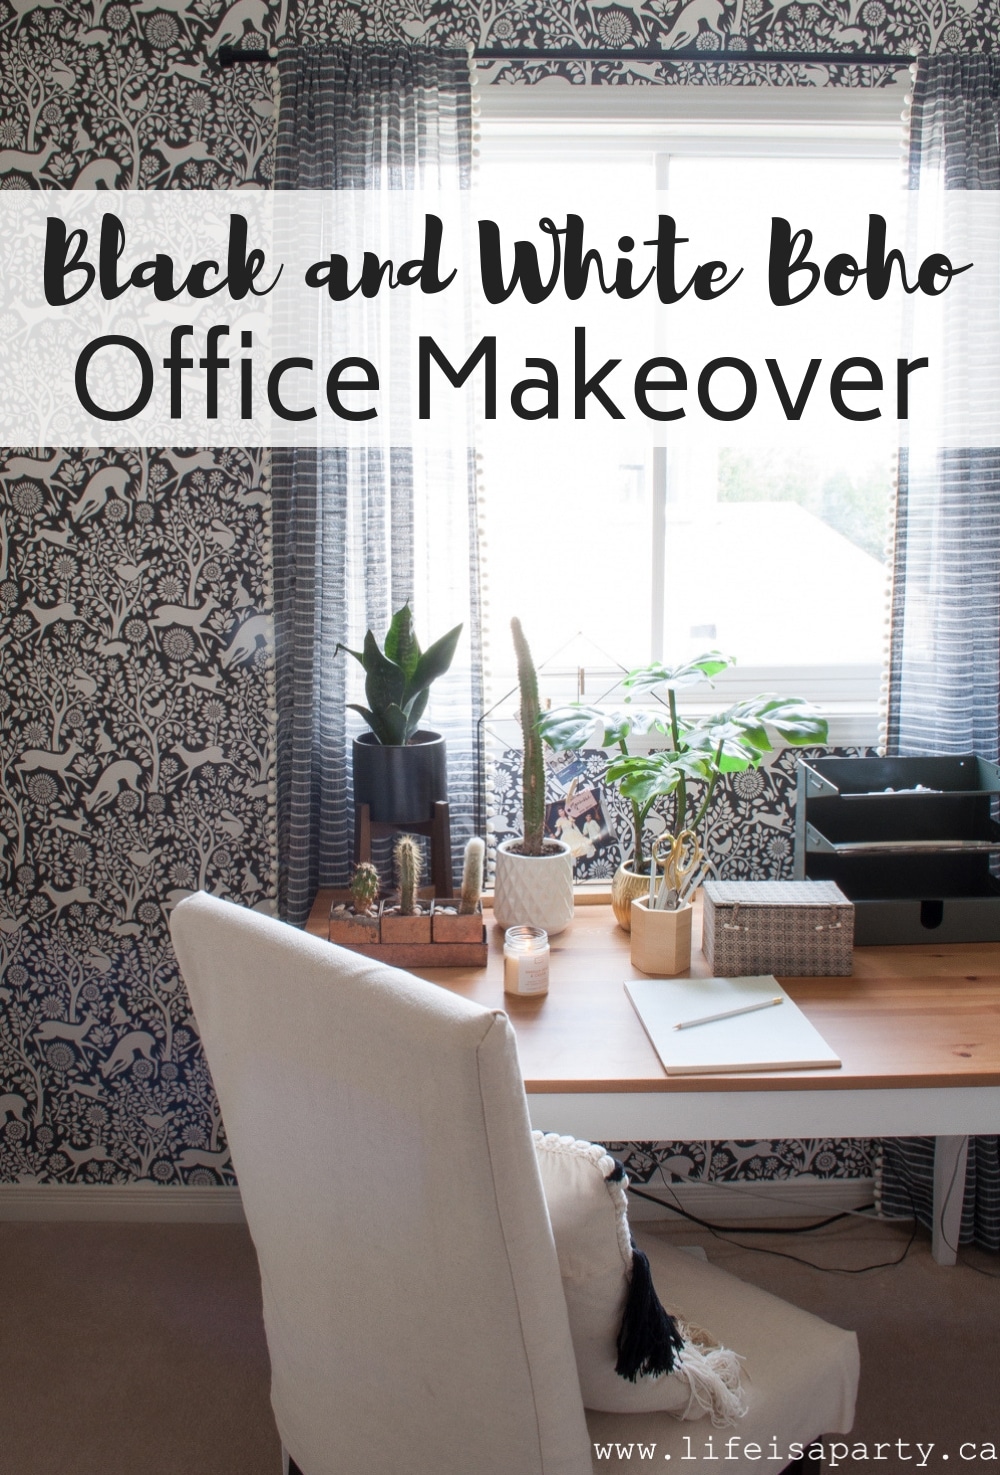 Black and White Boho Office Makeover: whimsical wallpaper, a wood bead chandelier, art, drapes, and lots of plants give this office the perfect boho vibe.